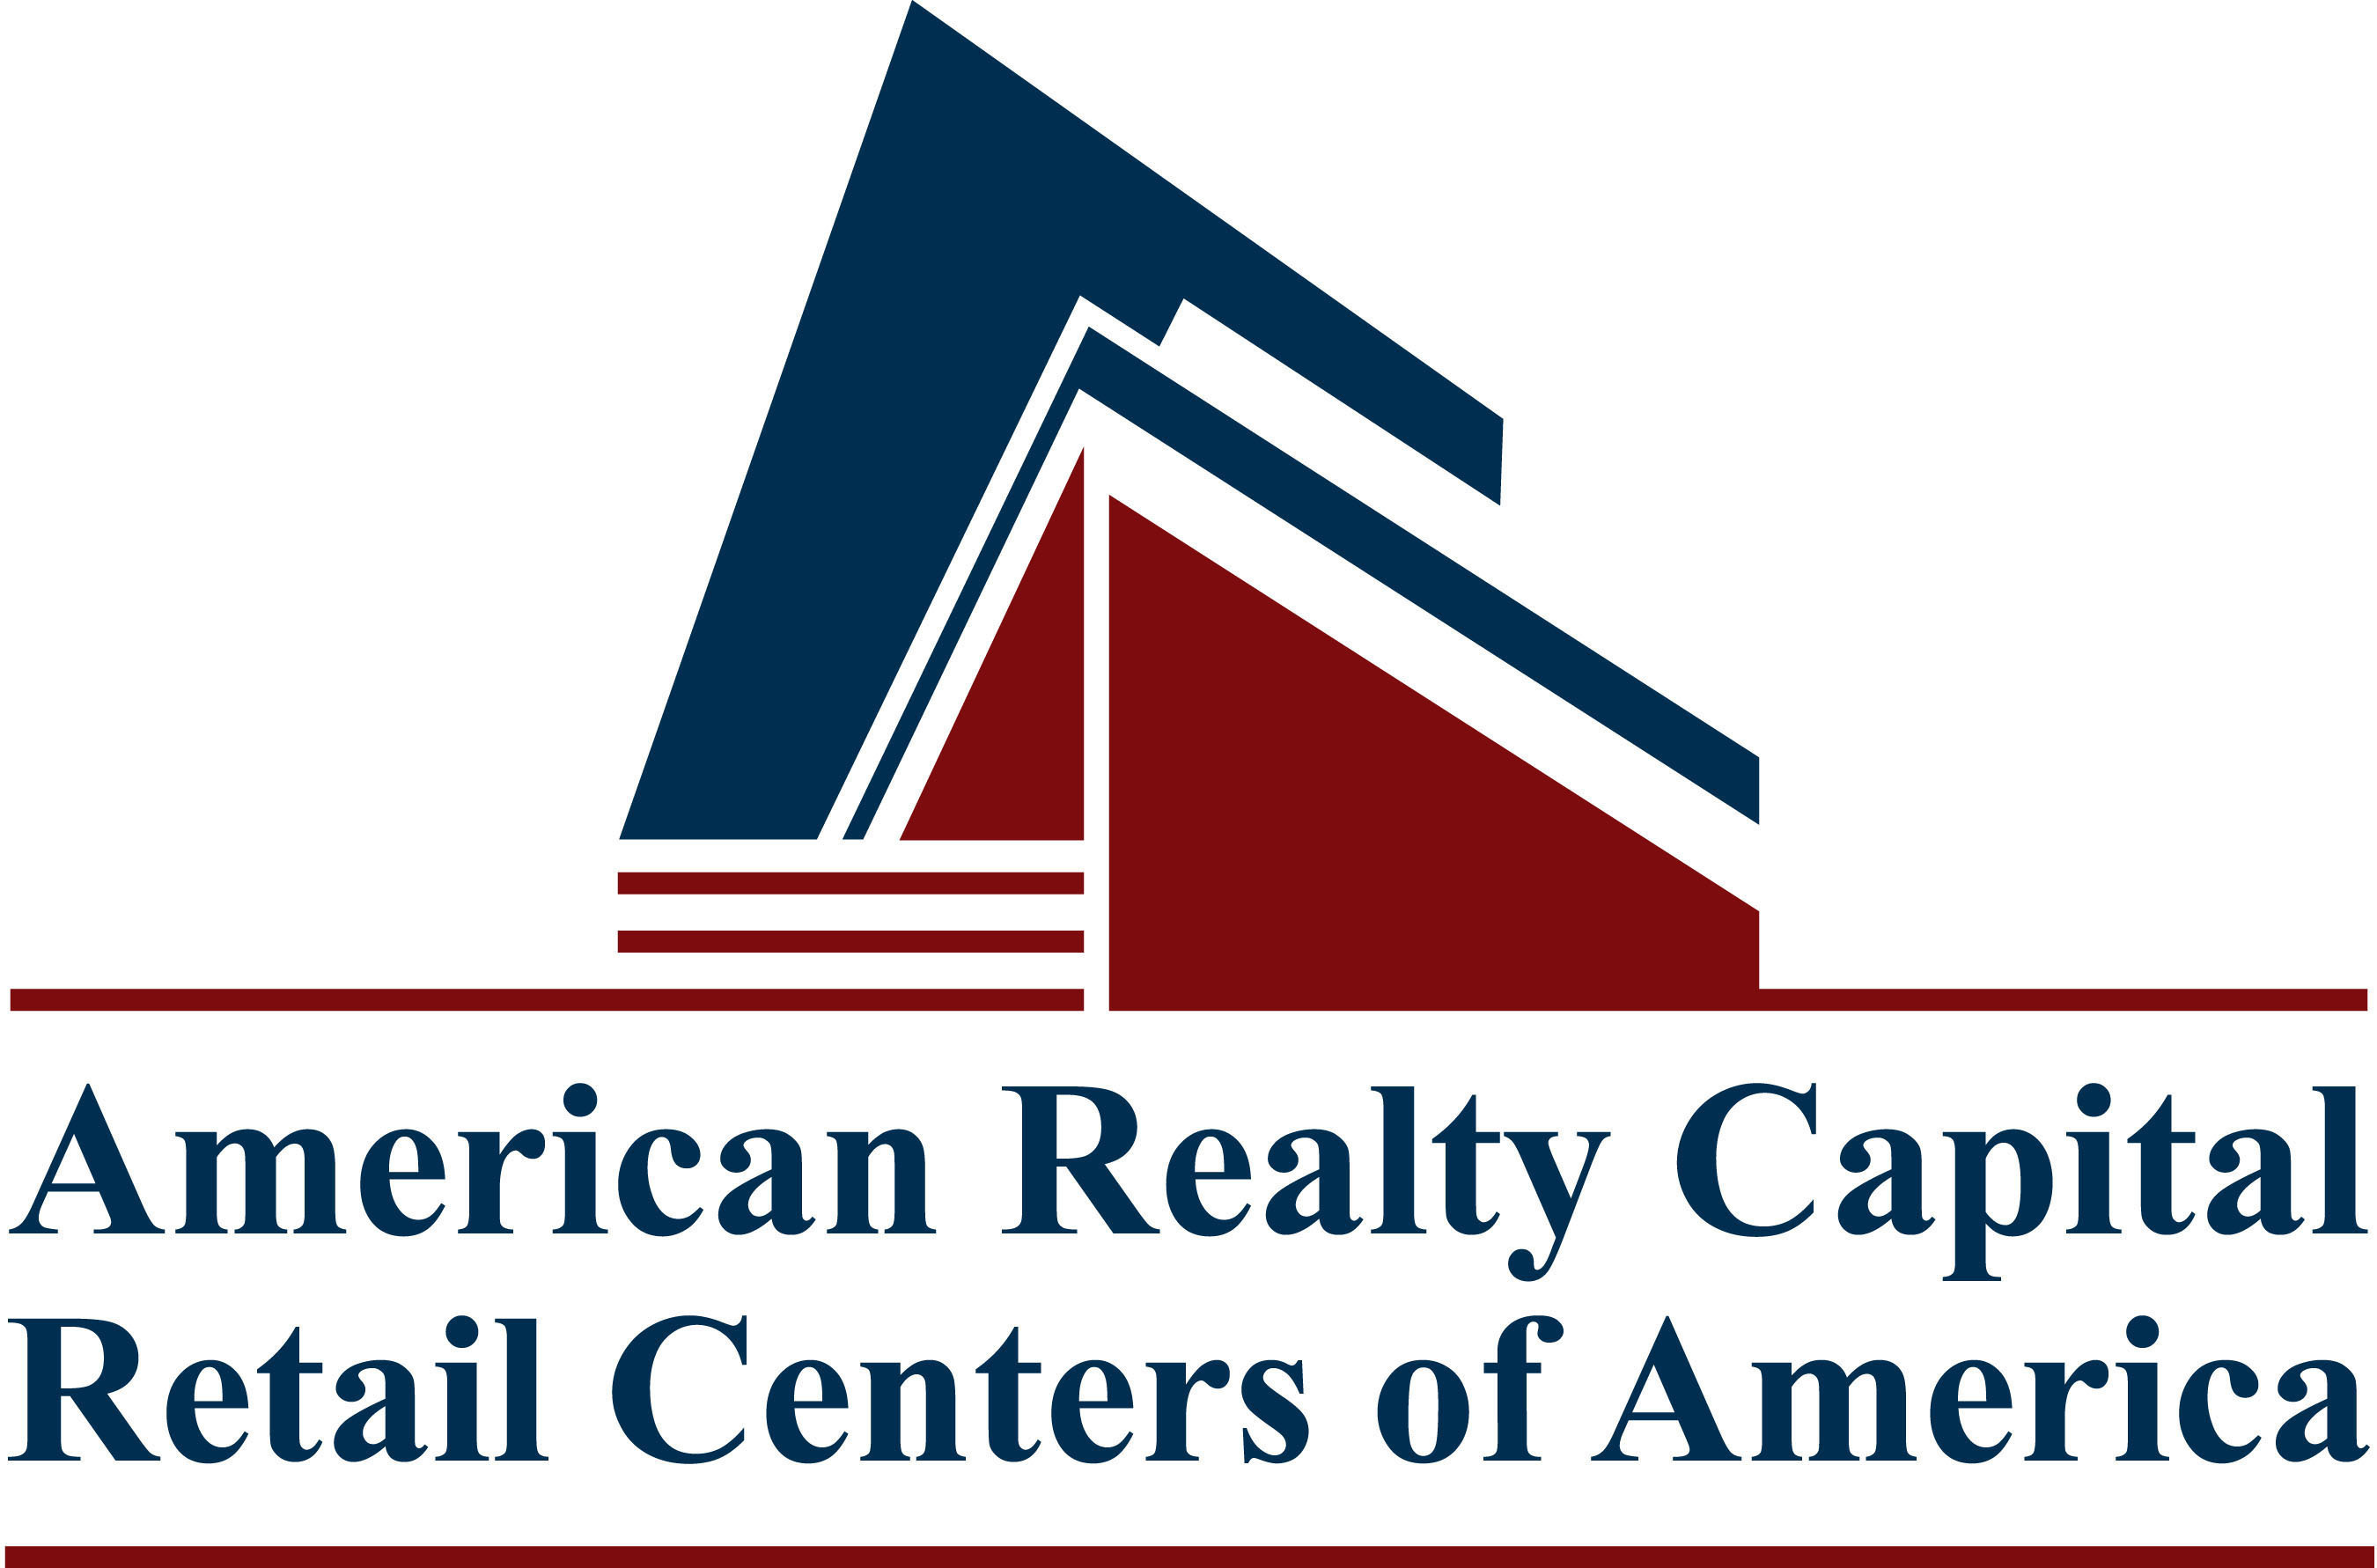 American Realty Capital Retail Centers of America logo. (PRNewsFoto/American Realty Capital - Retail Centers of America, Inc.) (PRNewsFoto/)